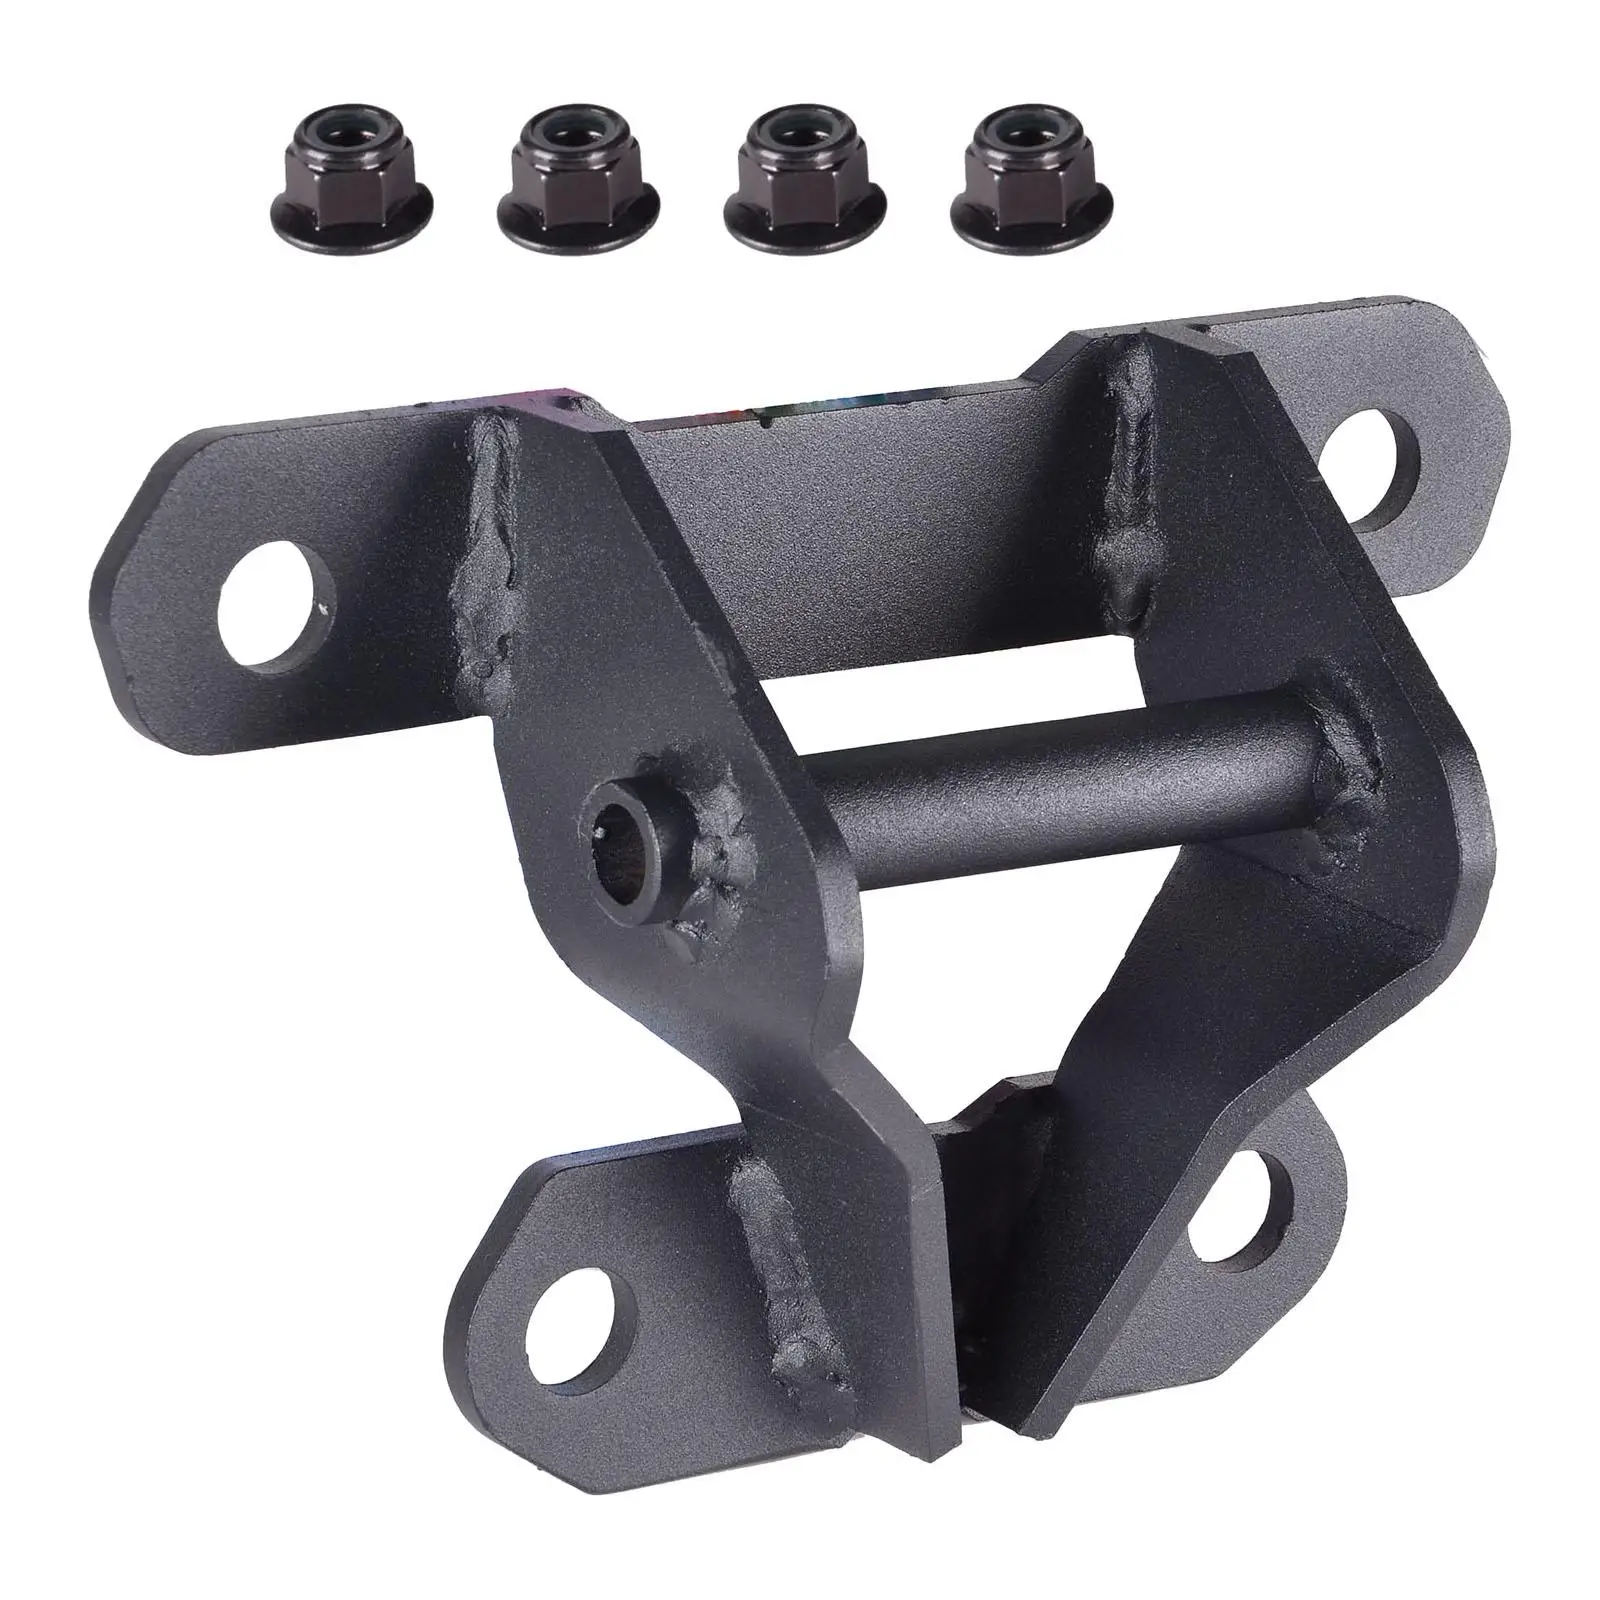 UTV Rear Pull Plate Tow Hook Fits for x3 / x32021 715004450